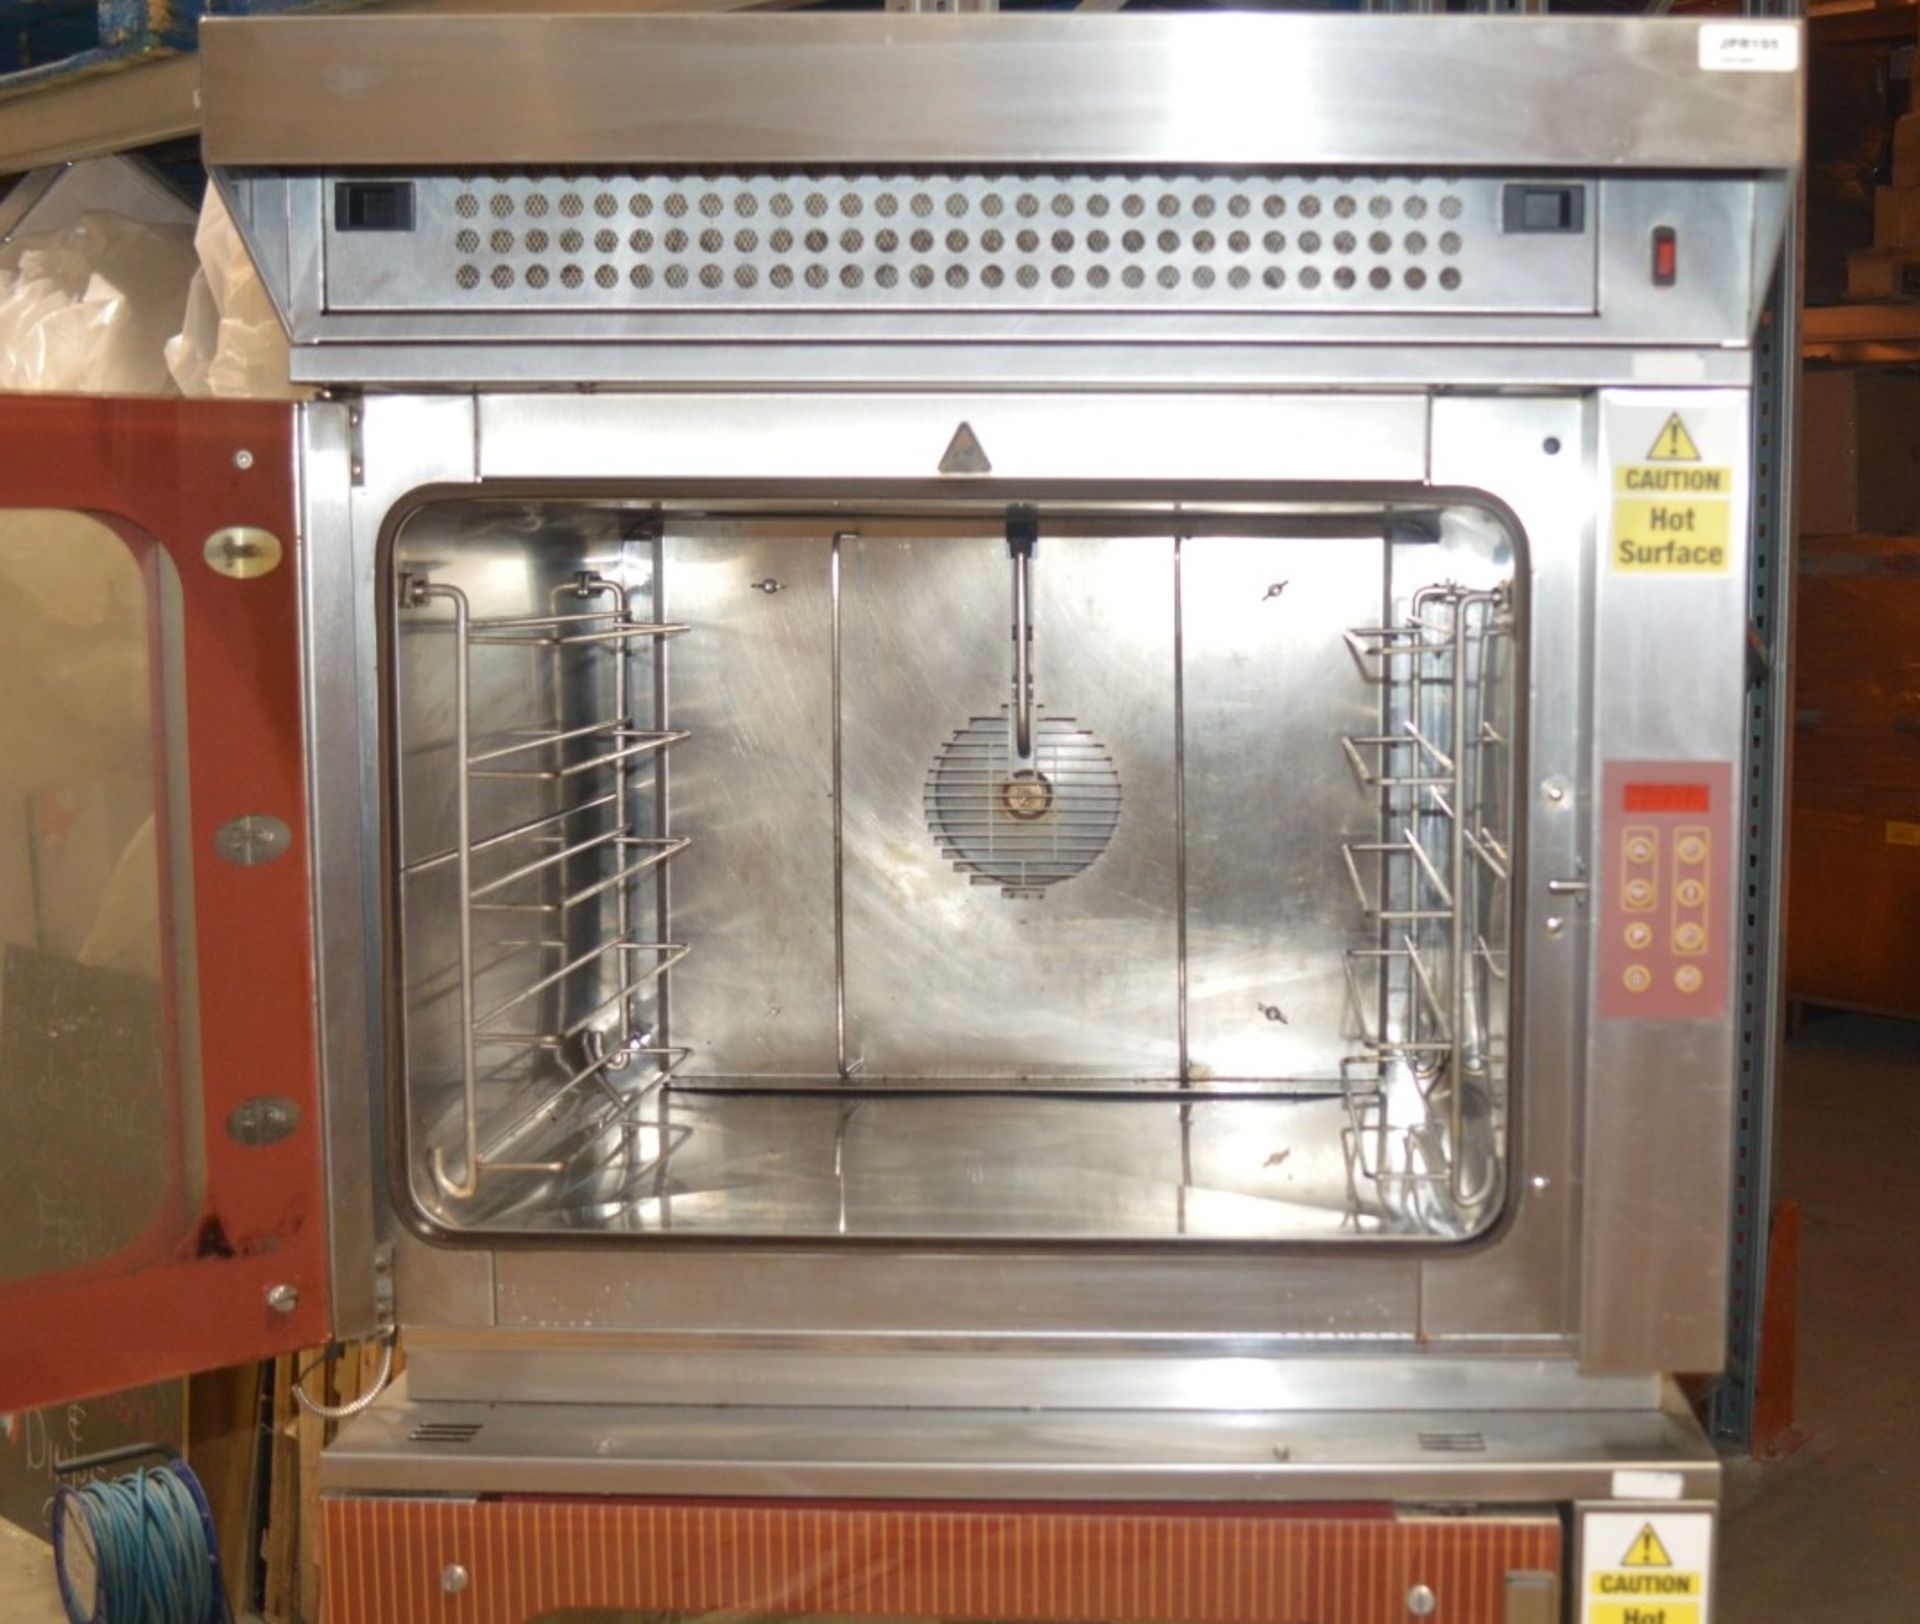 1 x FRI-JADO Stainless Steel Commercial Double Oven And Stand - Dimensions: H180 x W84 x D83cm - - Image 5 of 12